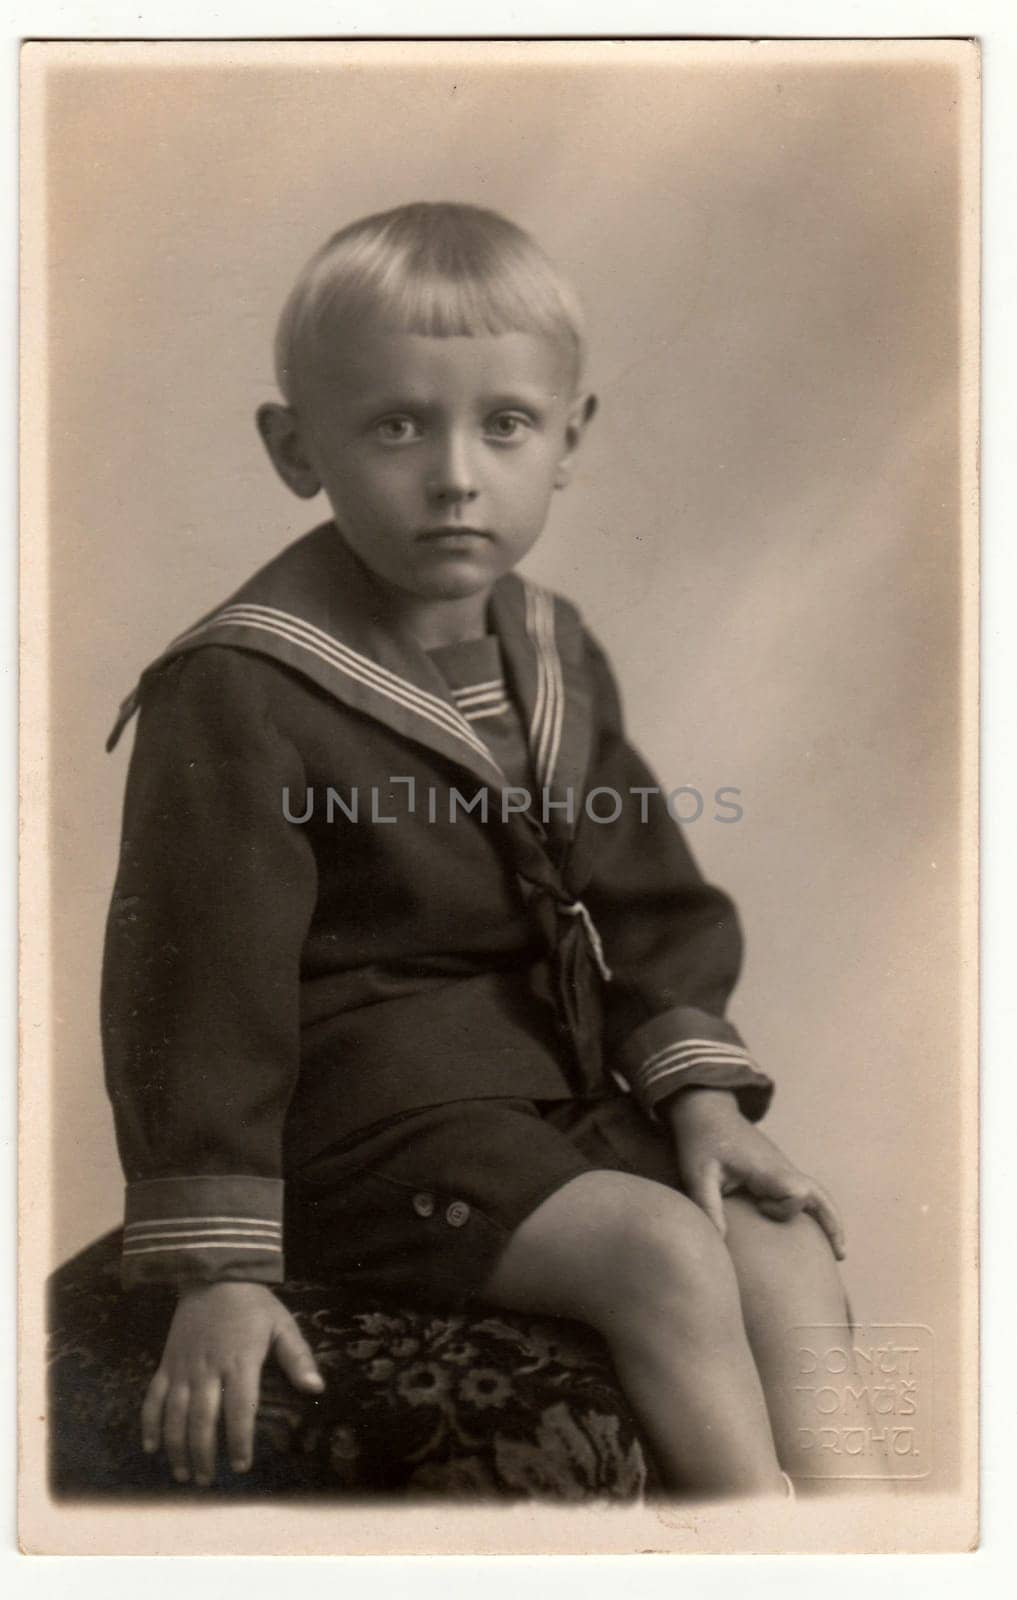 Vintage photo shows a young boy wears sailor costume. Retro black and white photography. Circa 1950s. by roman_nerud